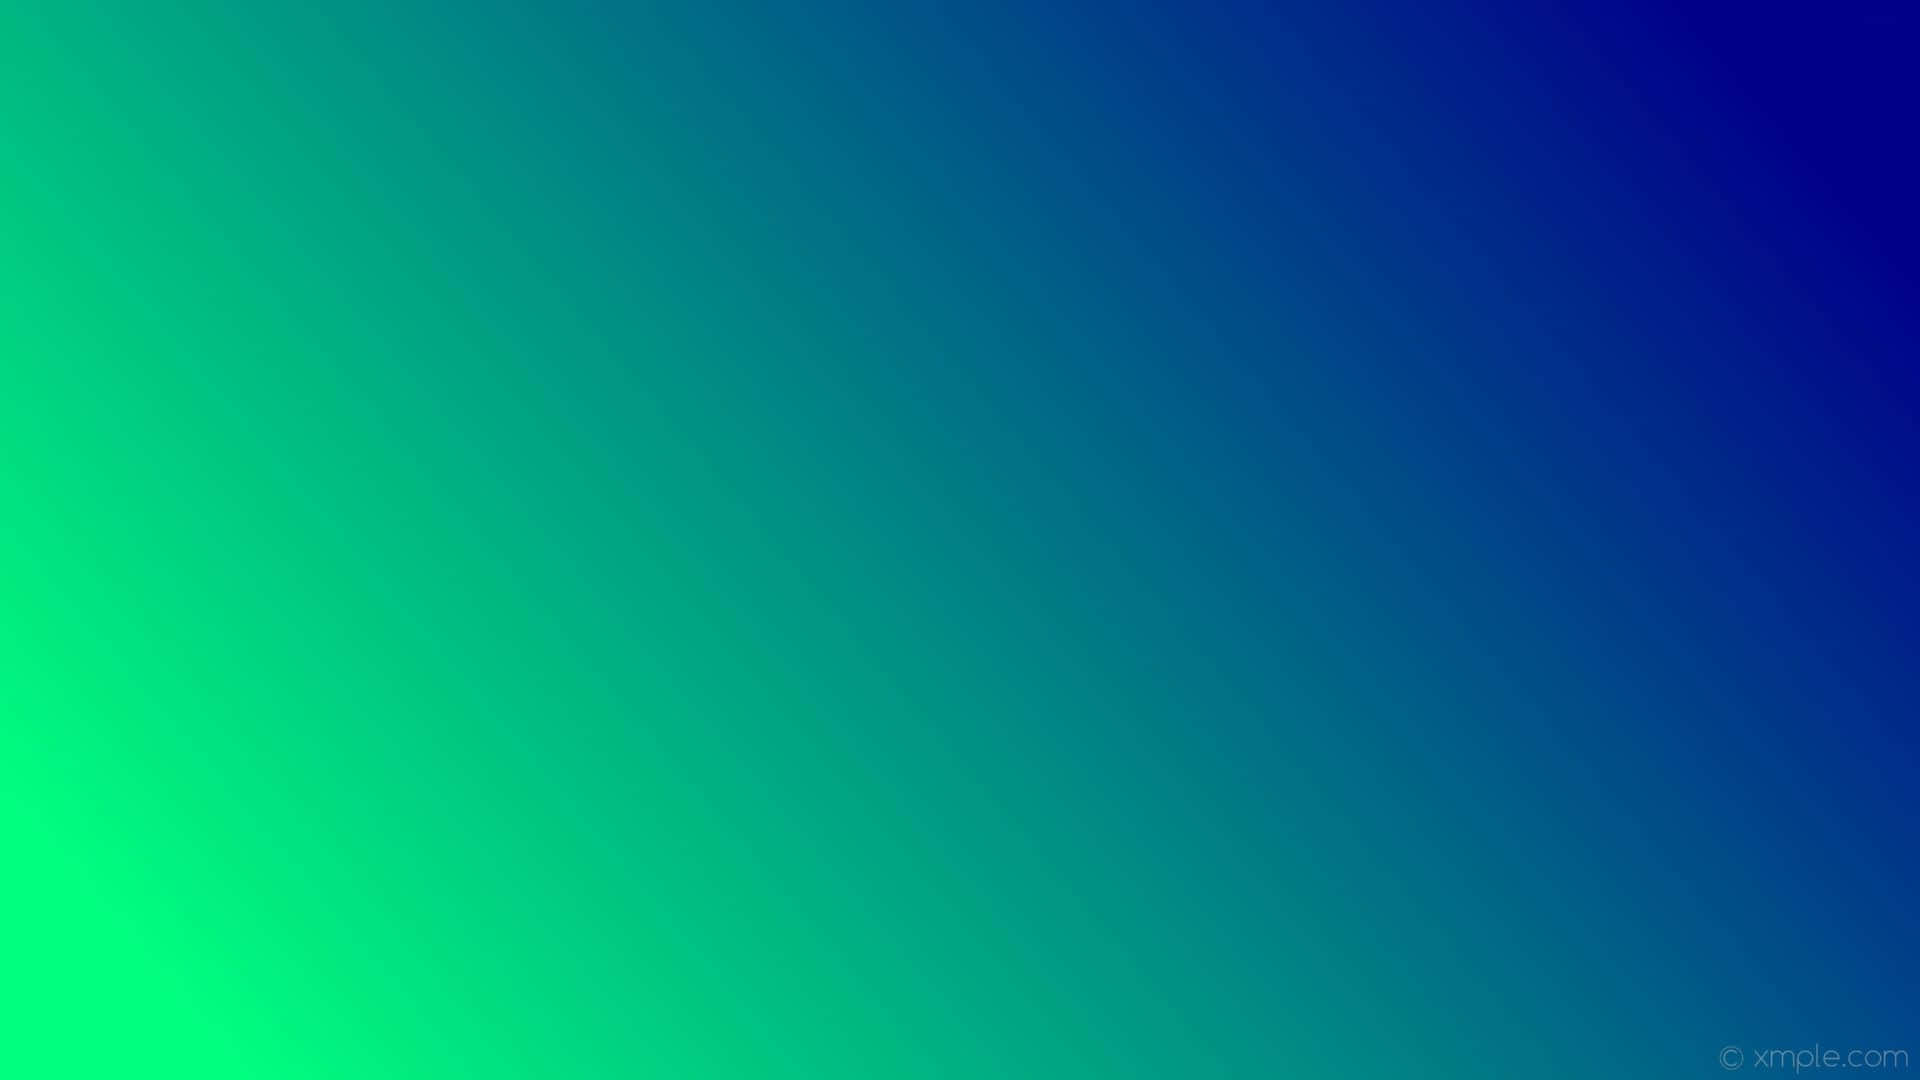 Blue And Green Background Wallpaper